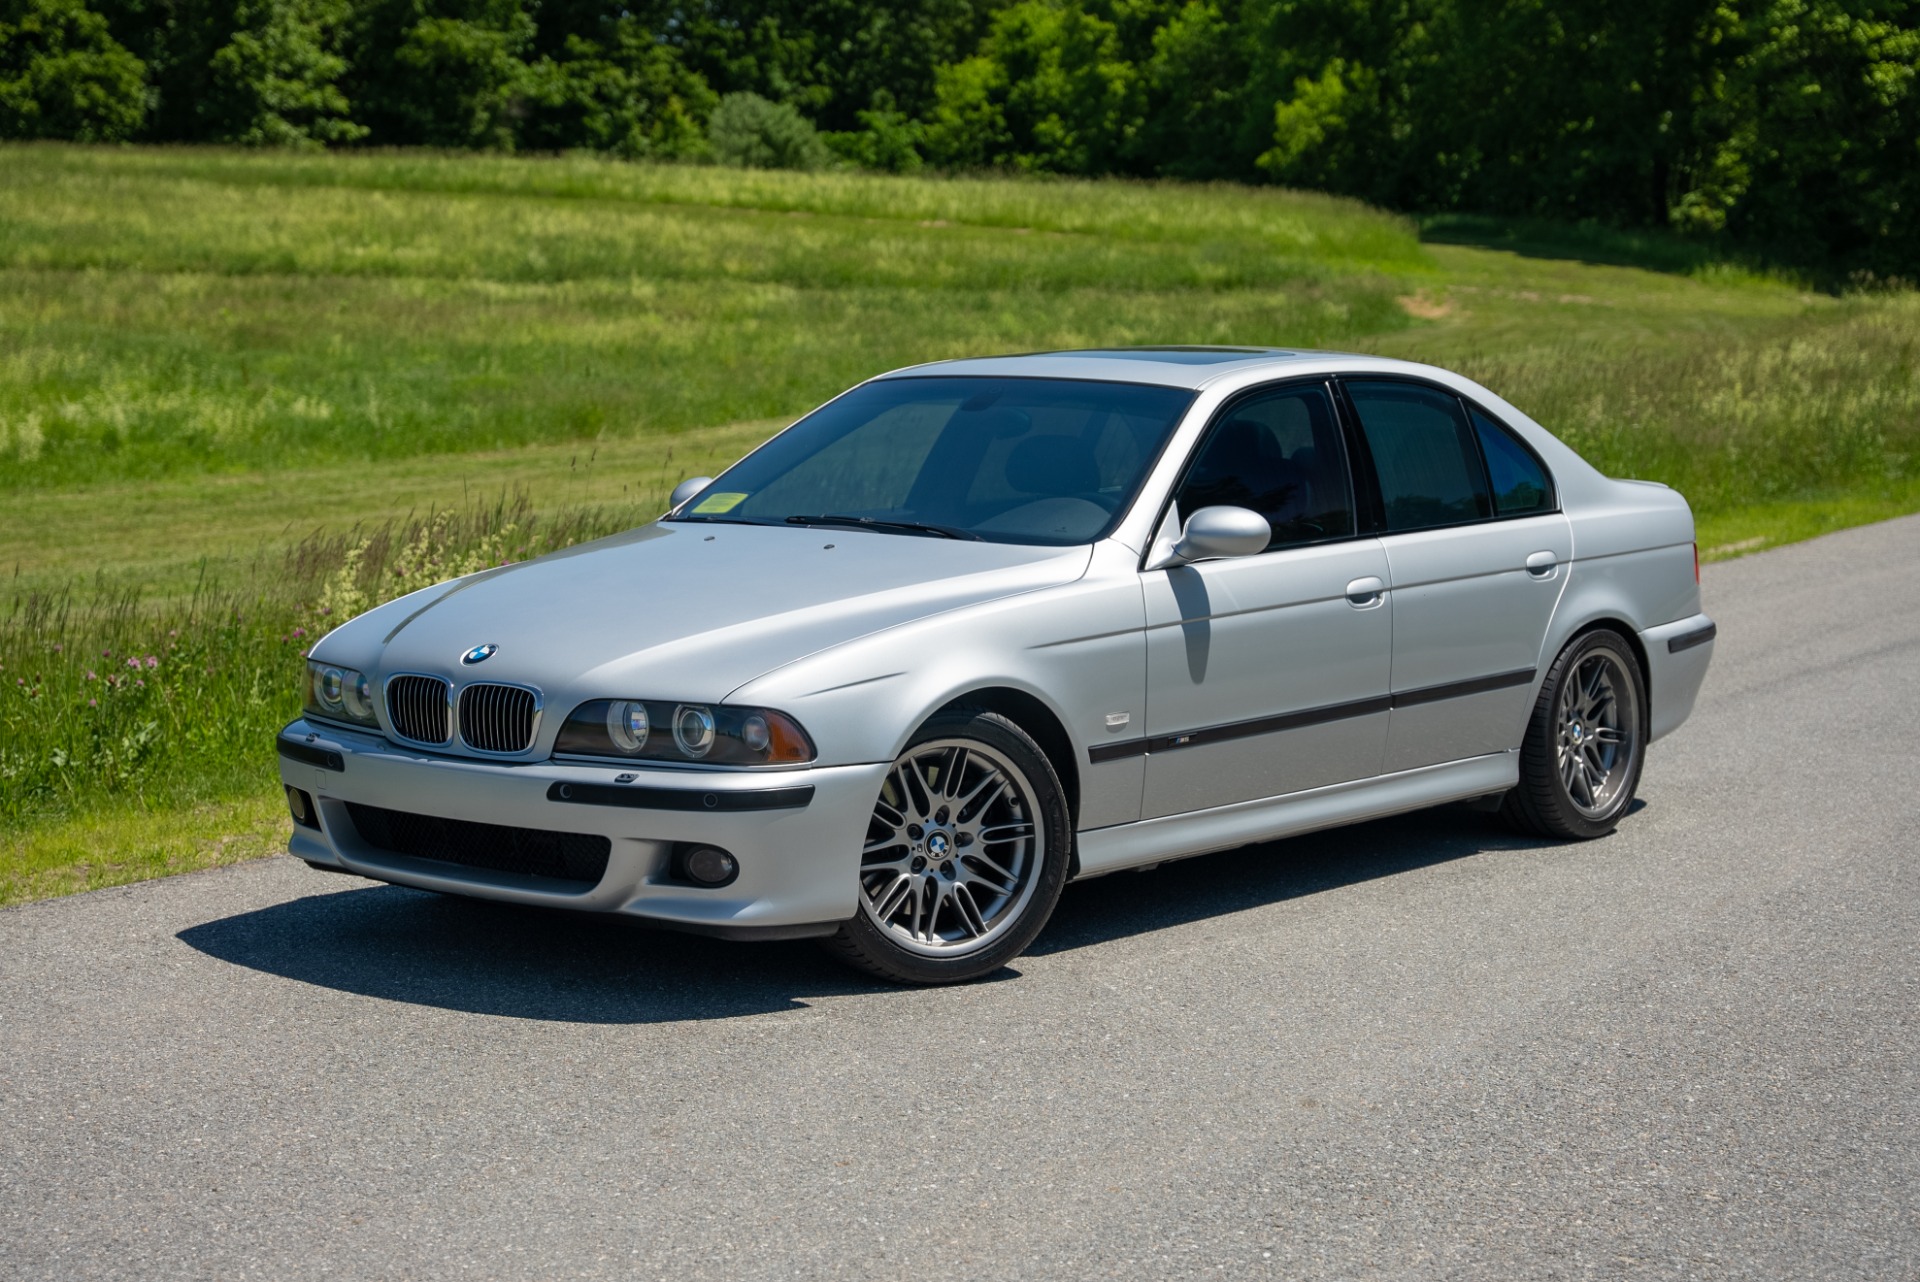 BMW E39 M5 2003 Titanium silver, highly customized - an absolutely